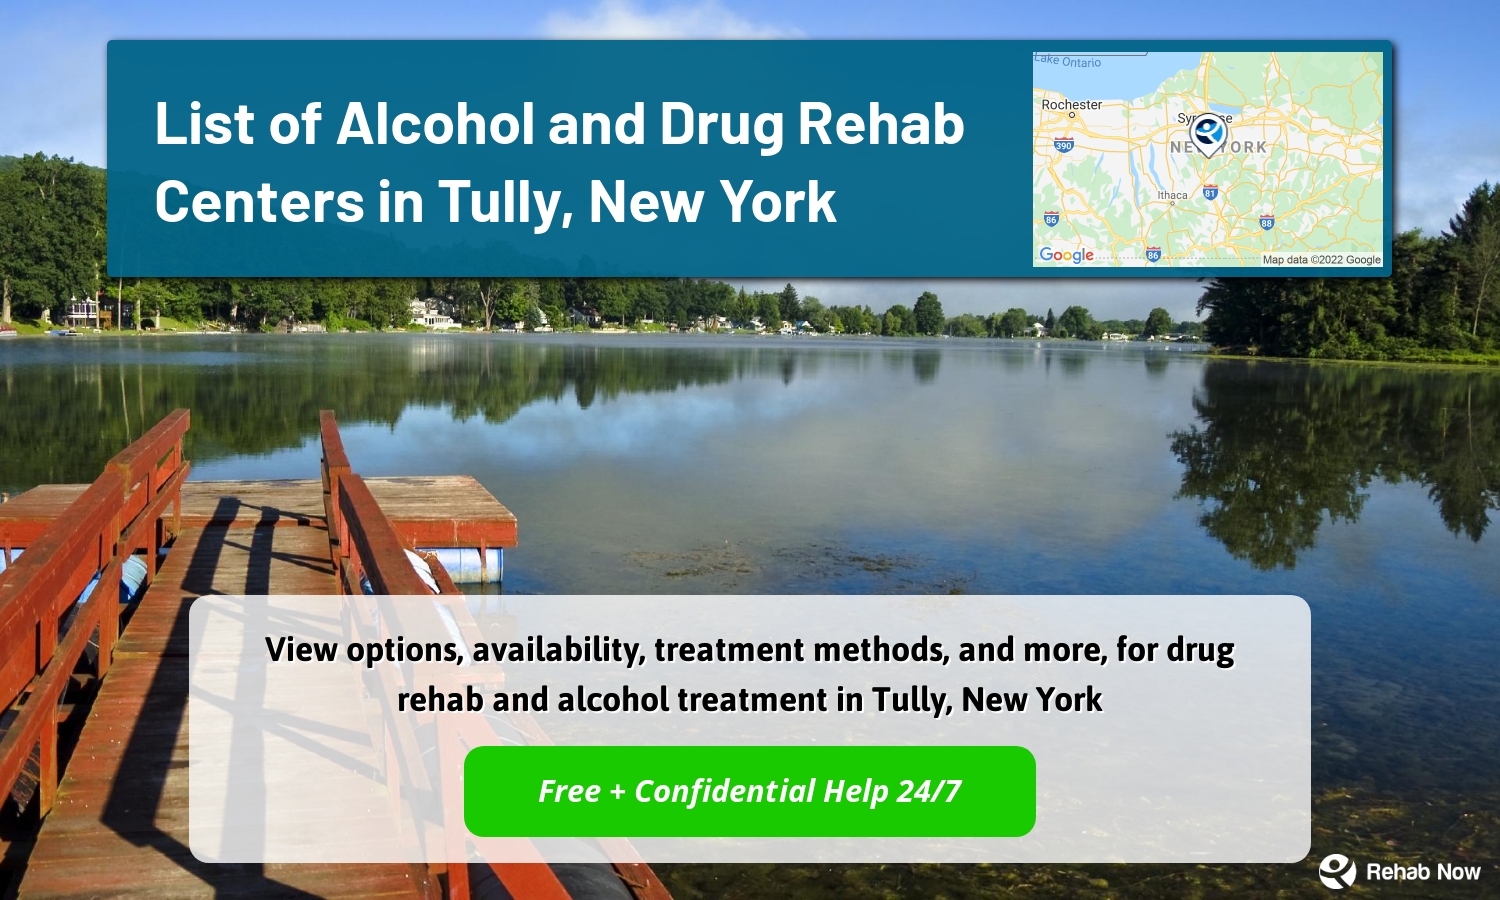 View options, availability, treatment methods, and more, for drug rehab and alcohol treatment in Tully, New York